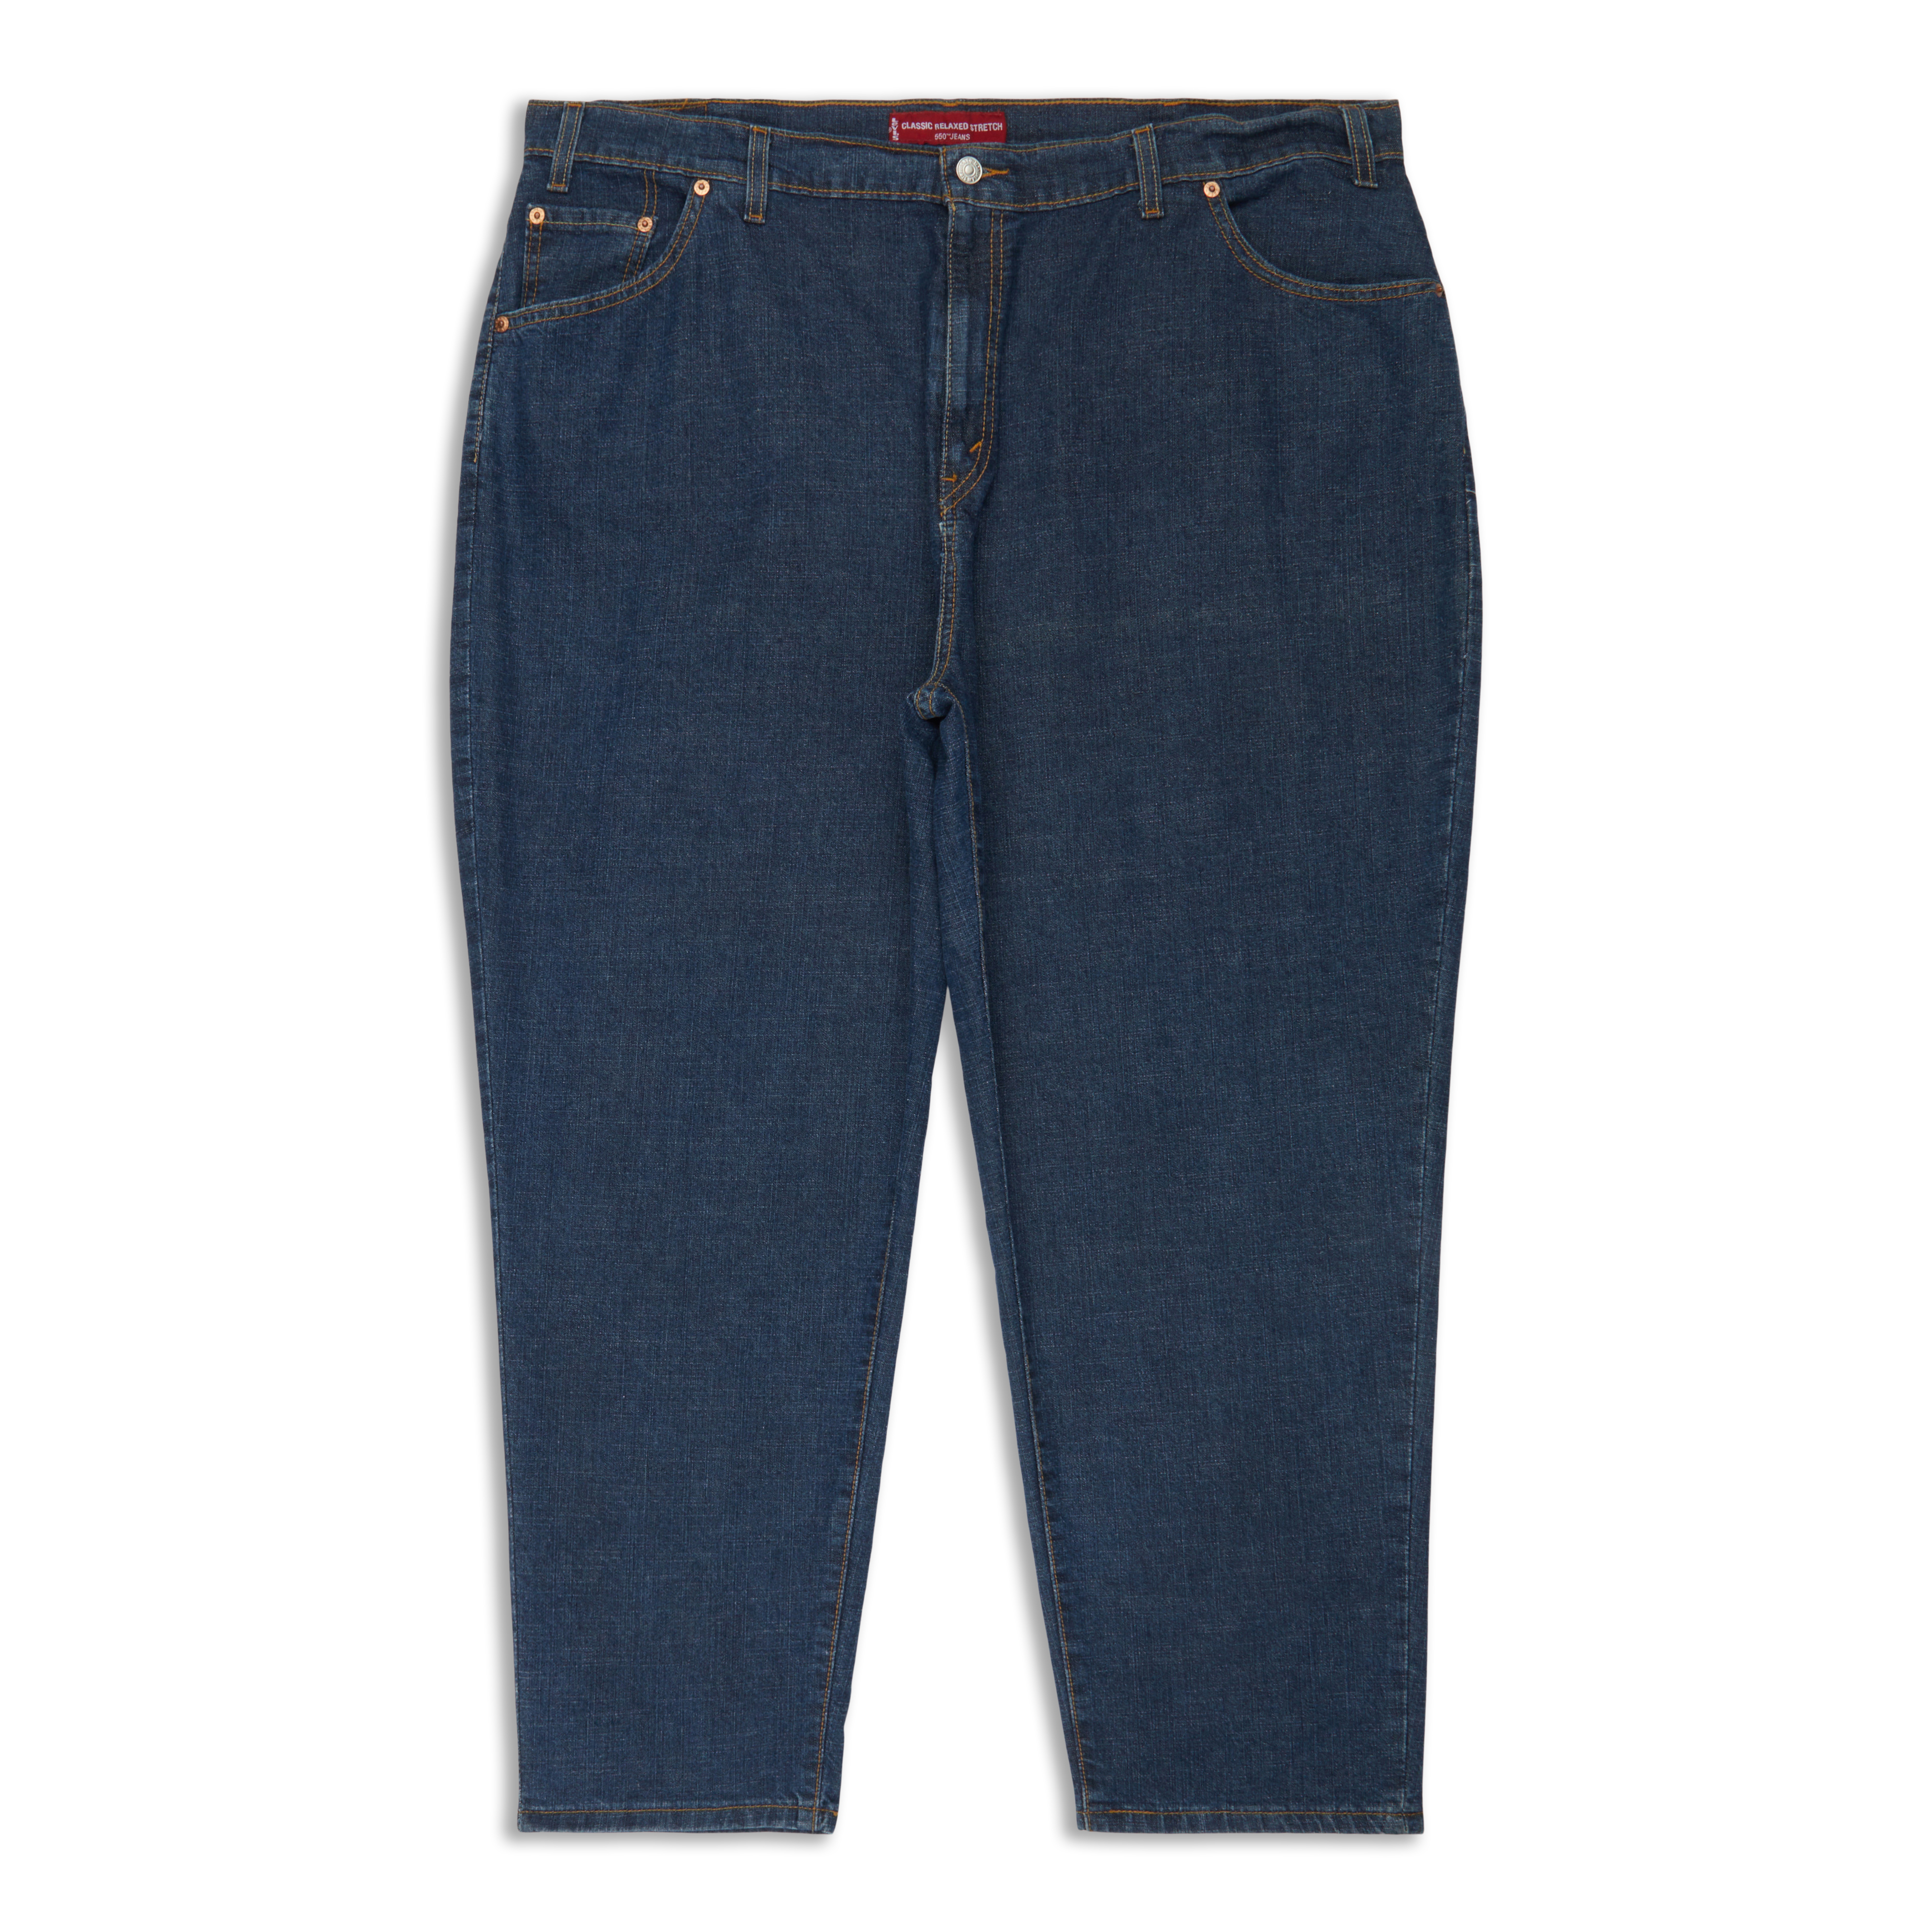 Levis 550™ Relaxed Fit Big Boys Jeans 8-20 (Husky) Original